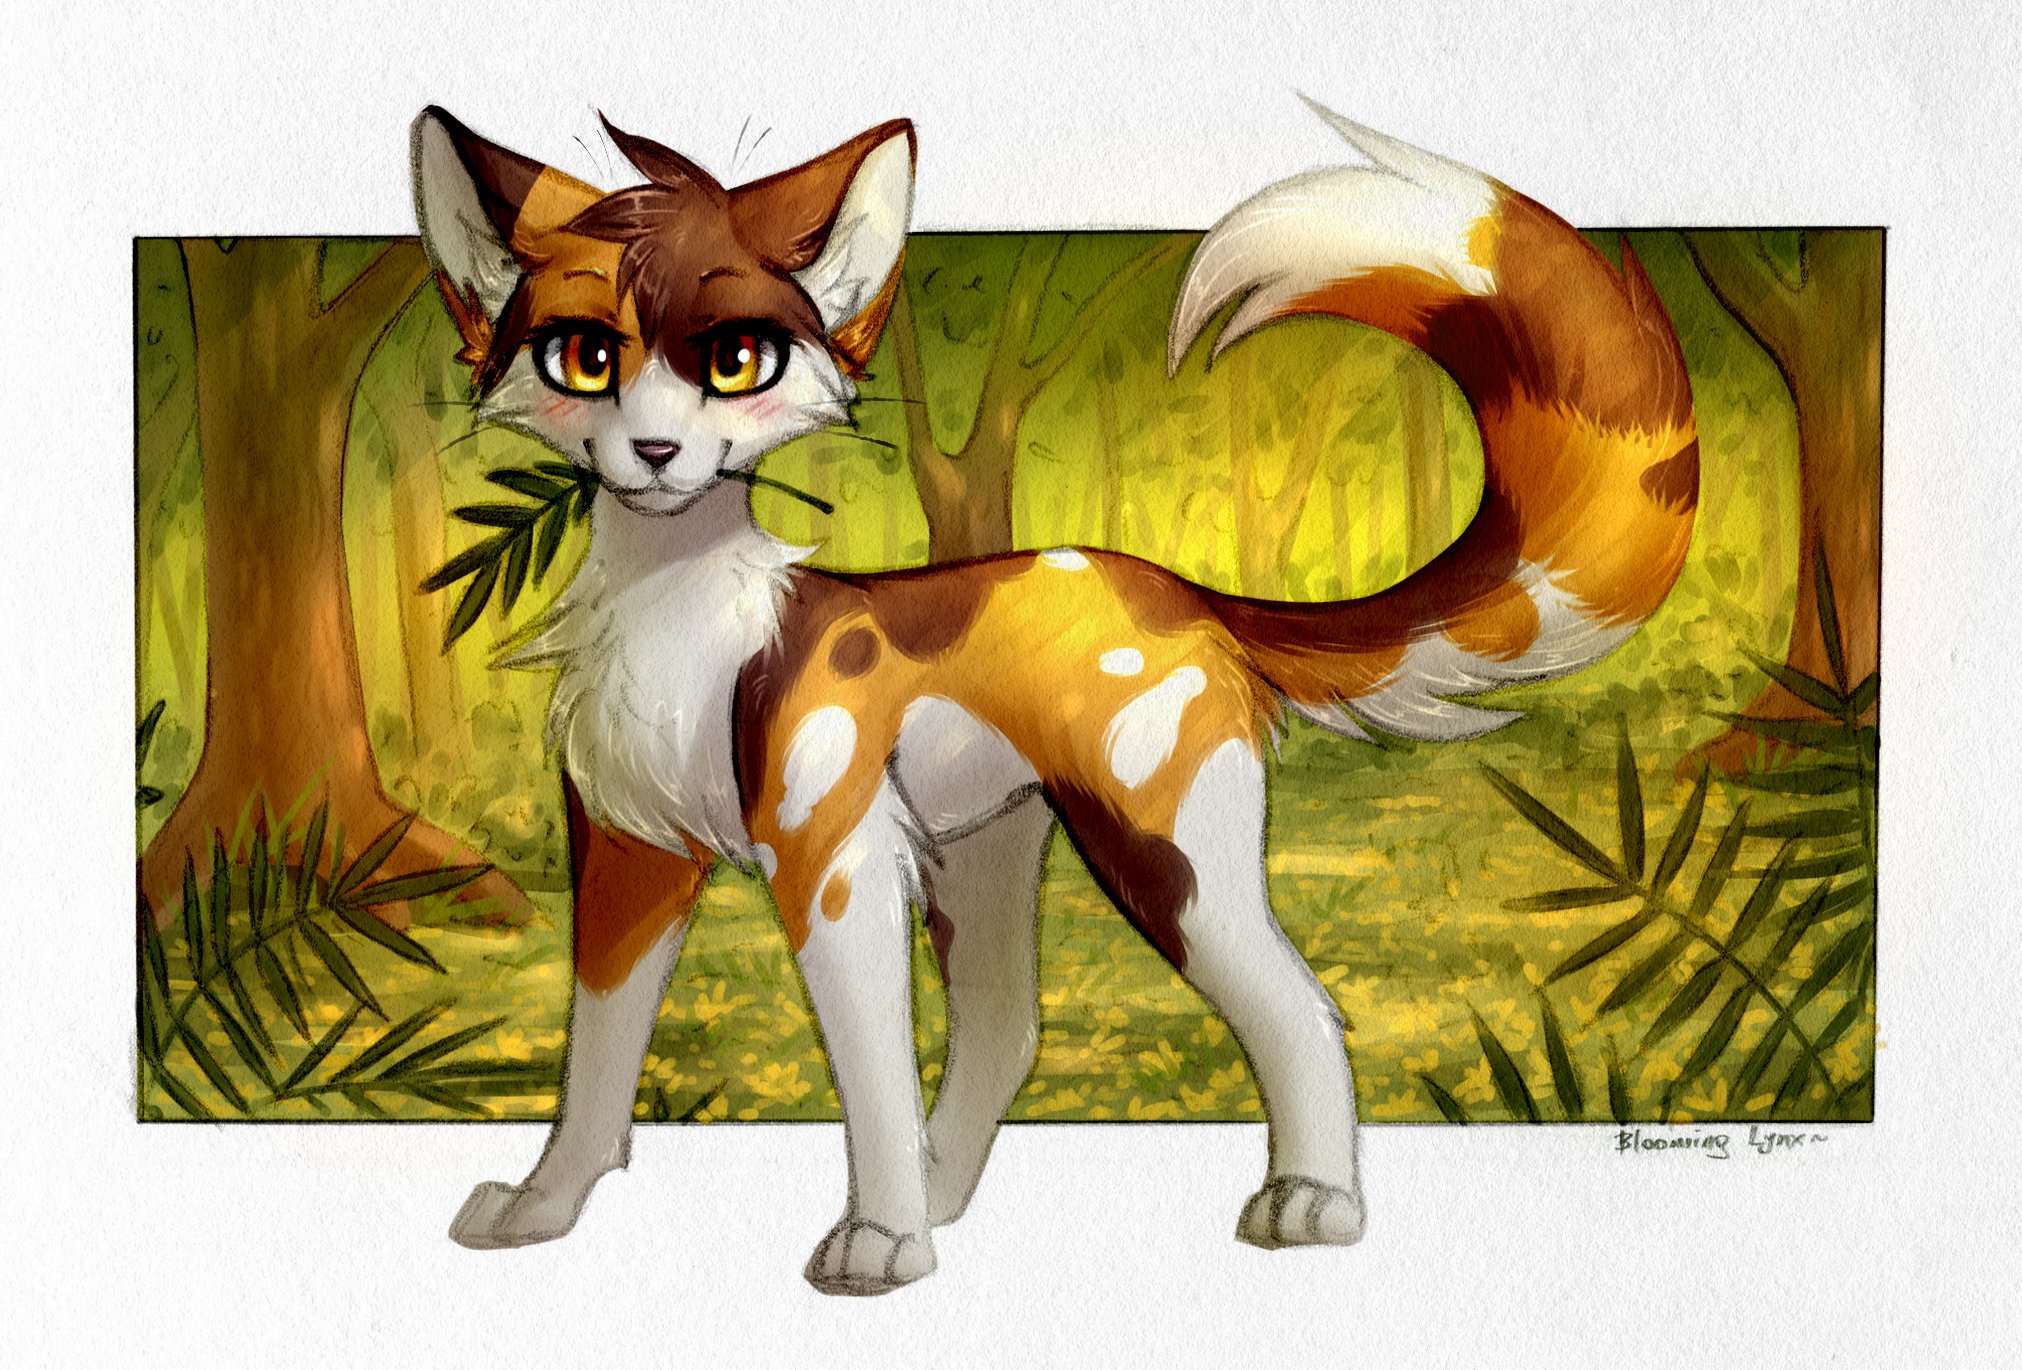 Mentalt Lily Assimilate 🌿 BLOOMING LYNX 🌿 on X: "#warriorcats #Spottedleaf Fanart on the series  of novels "Warrior Cats" :3 https://t.co/rsSuRjMK89" / X